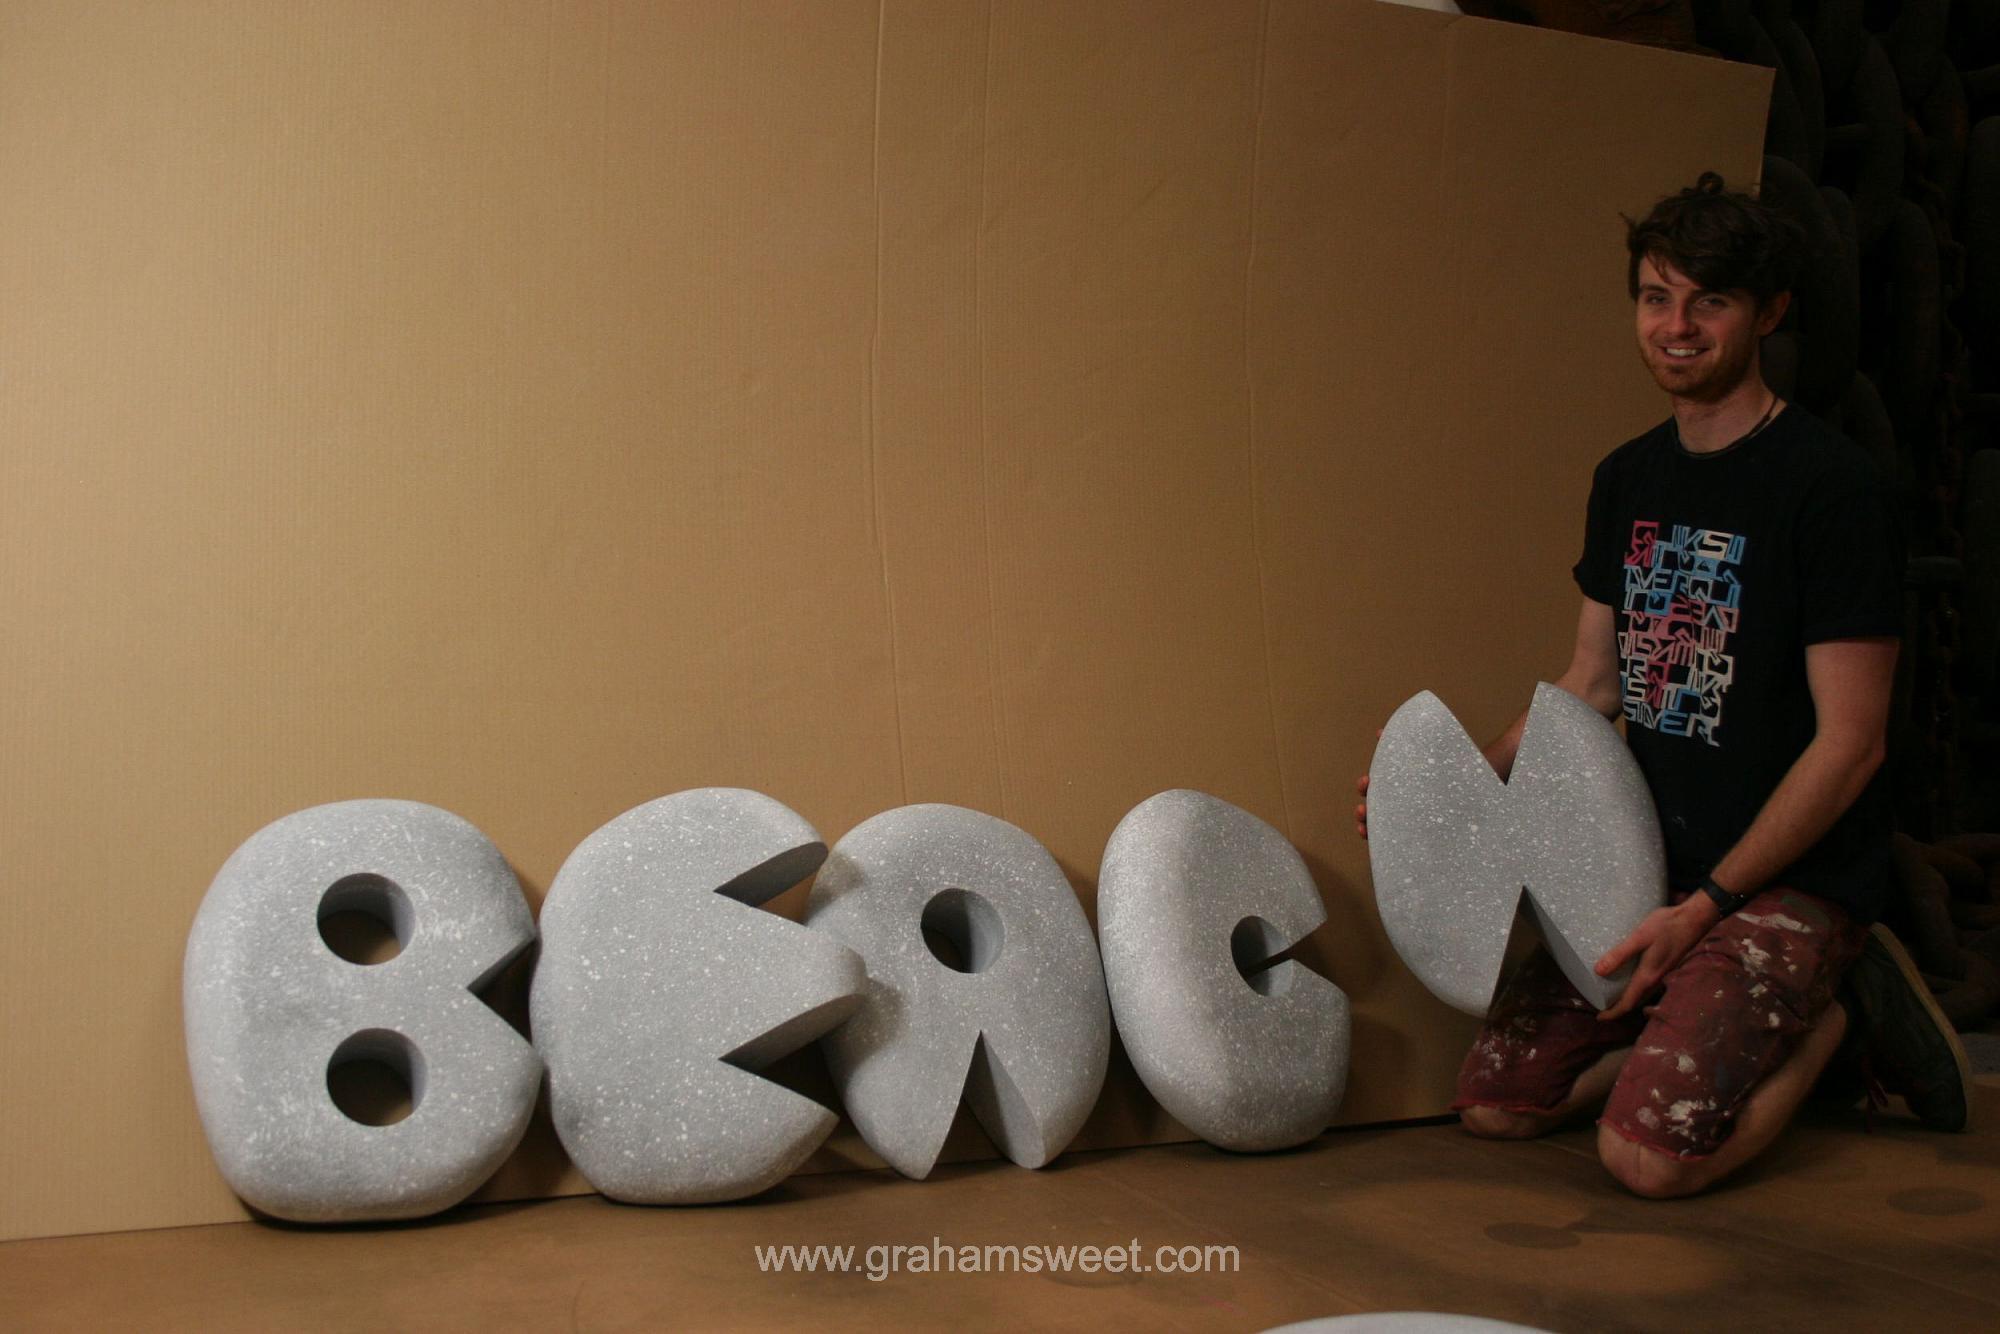 polystyrene letters - in the style of pebbles